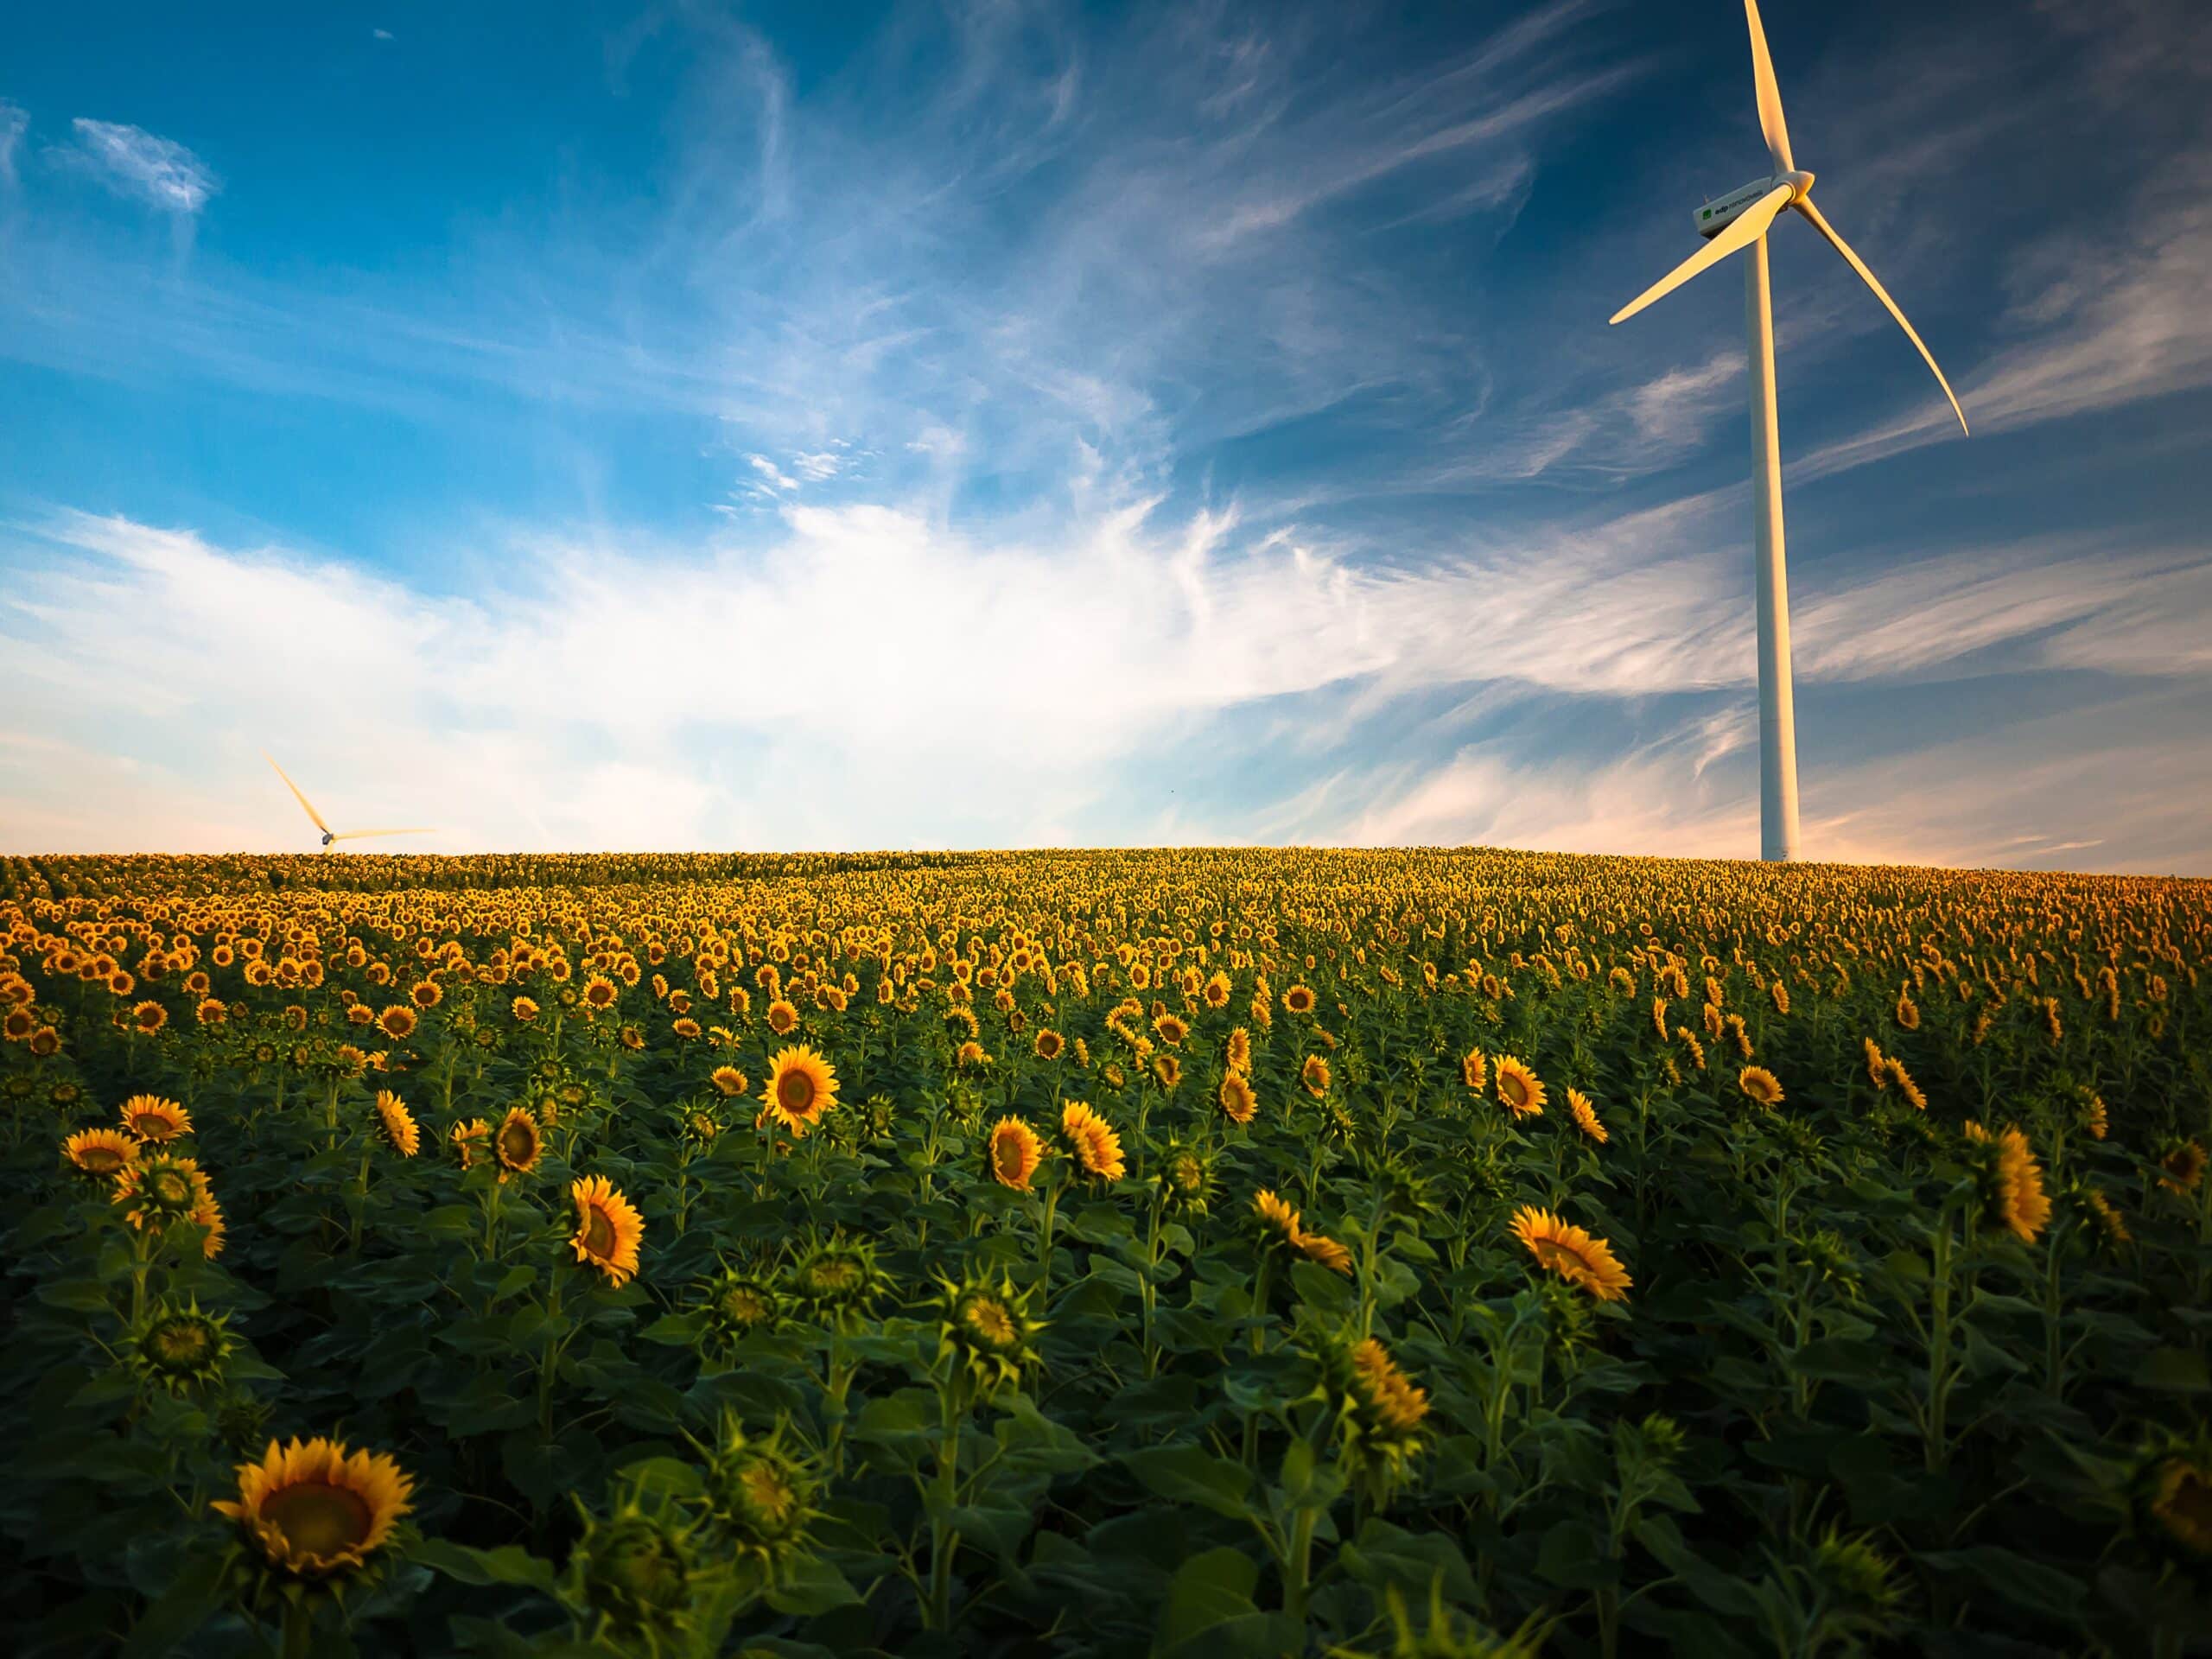 Battle Born Batteries: A windmill for Renewable Energy sits in a field of sunflowers